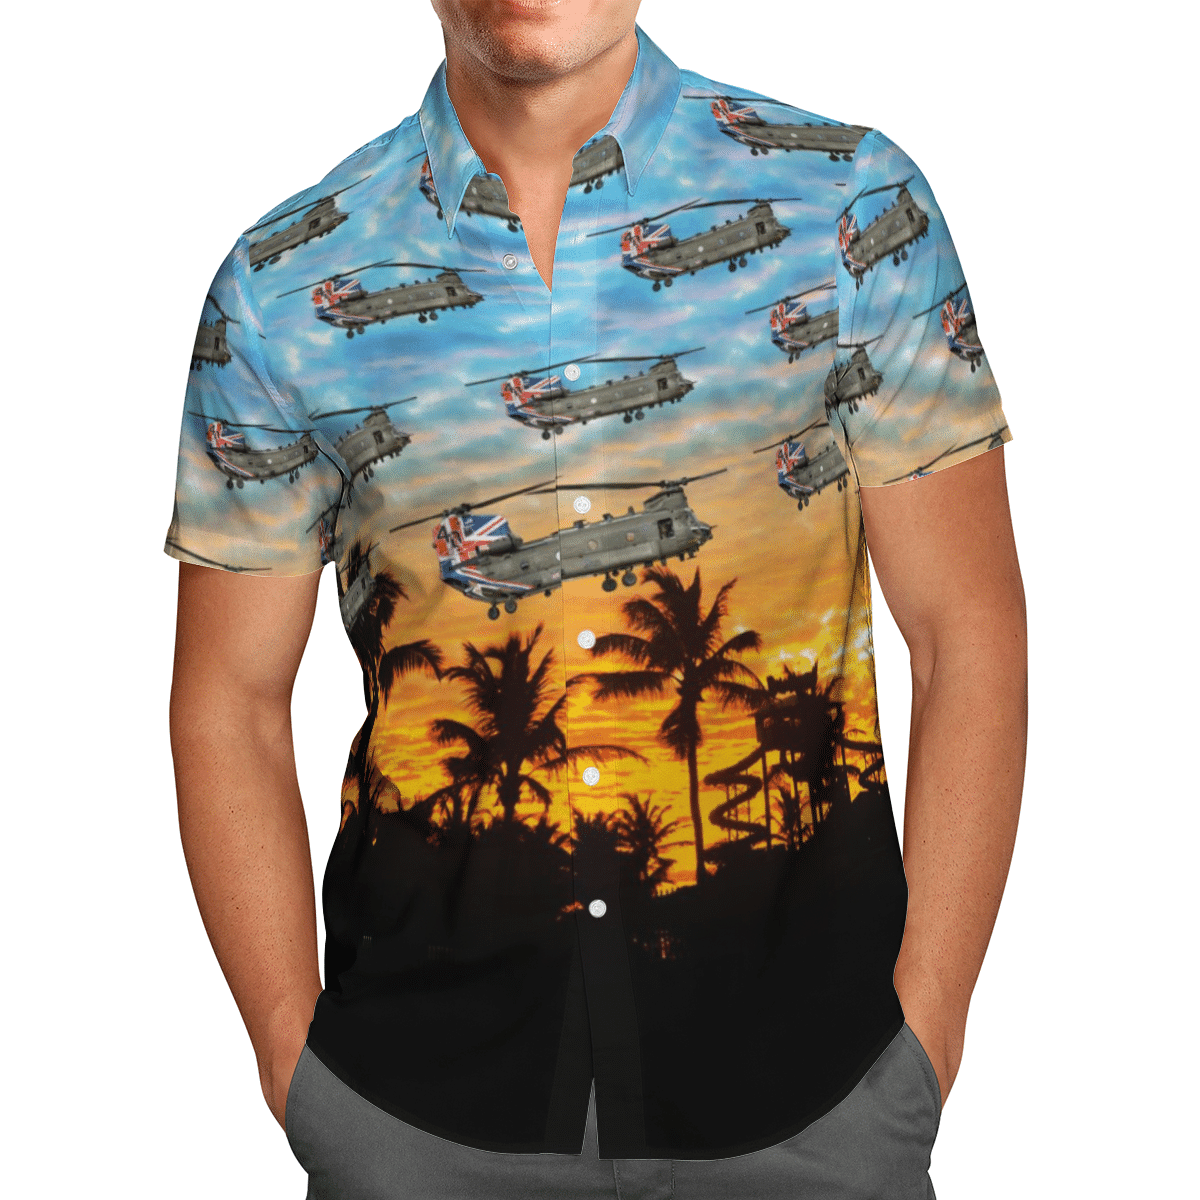 HOT RAF Union Jack Boeing Chinook 40th Anniversary All Over Print Tropical Shirt1